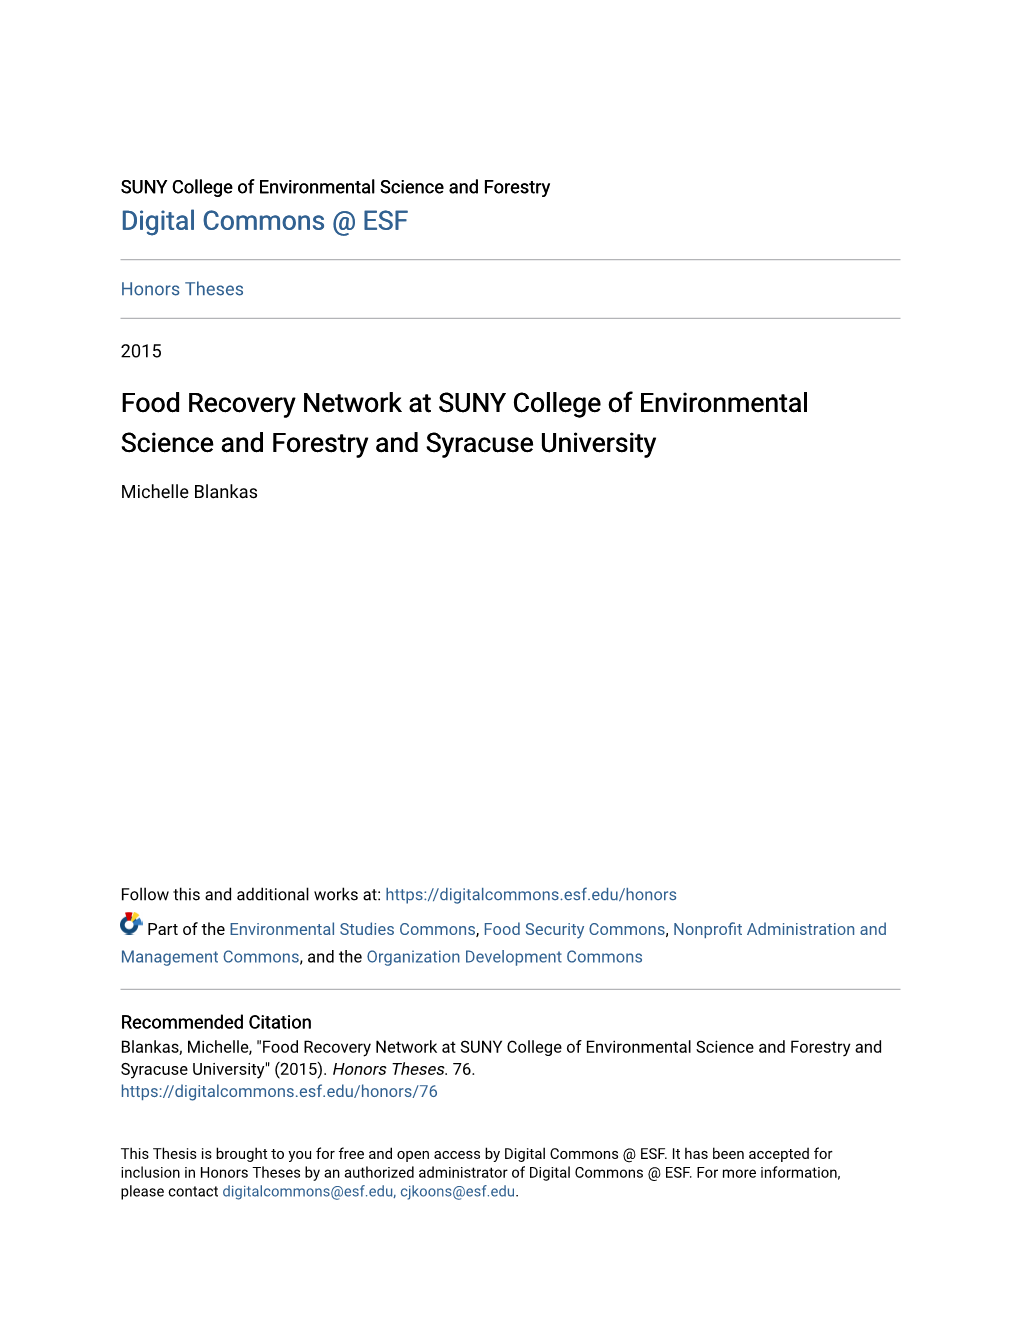 Food Recovery Network at SUNY College of Environmental Science and Forestry and Syracuse University